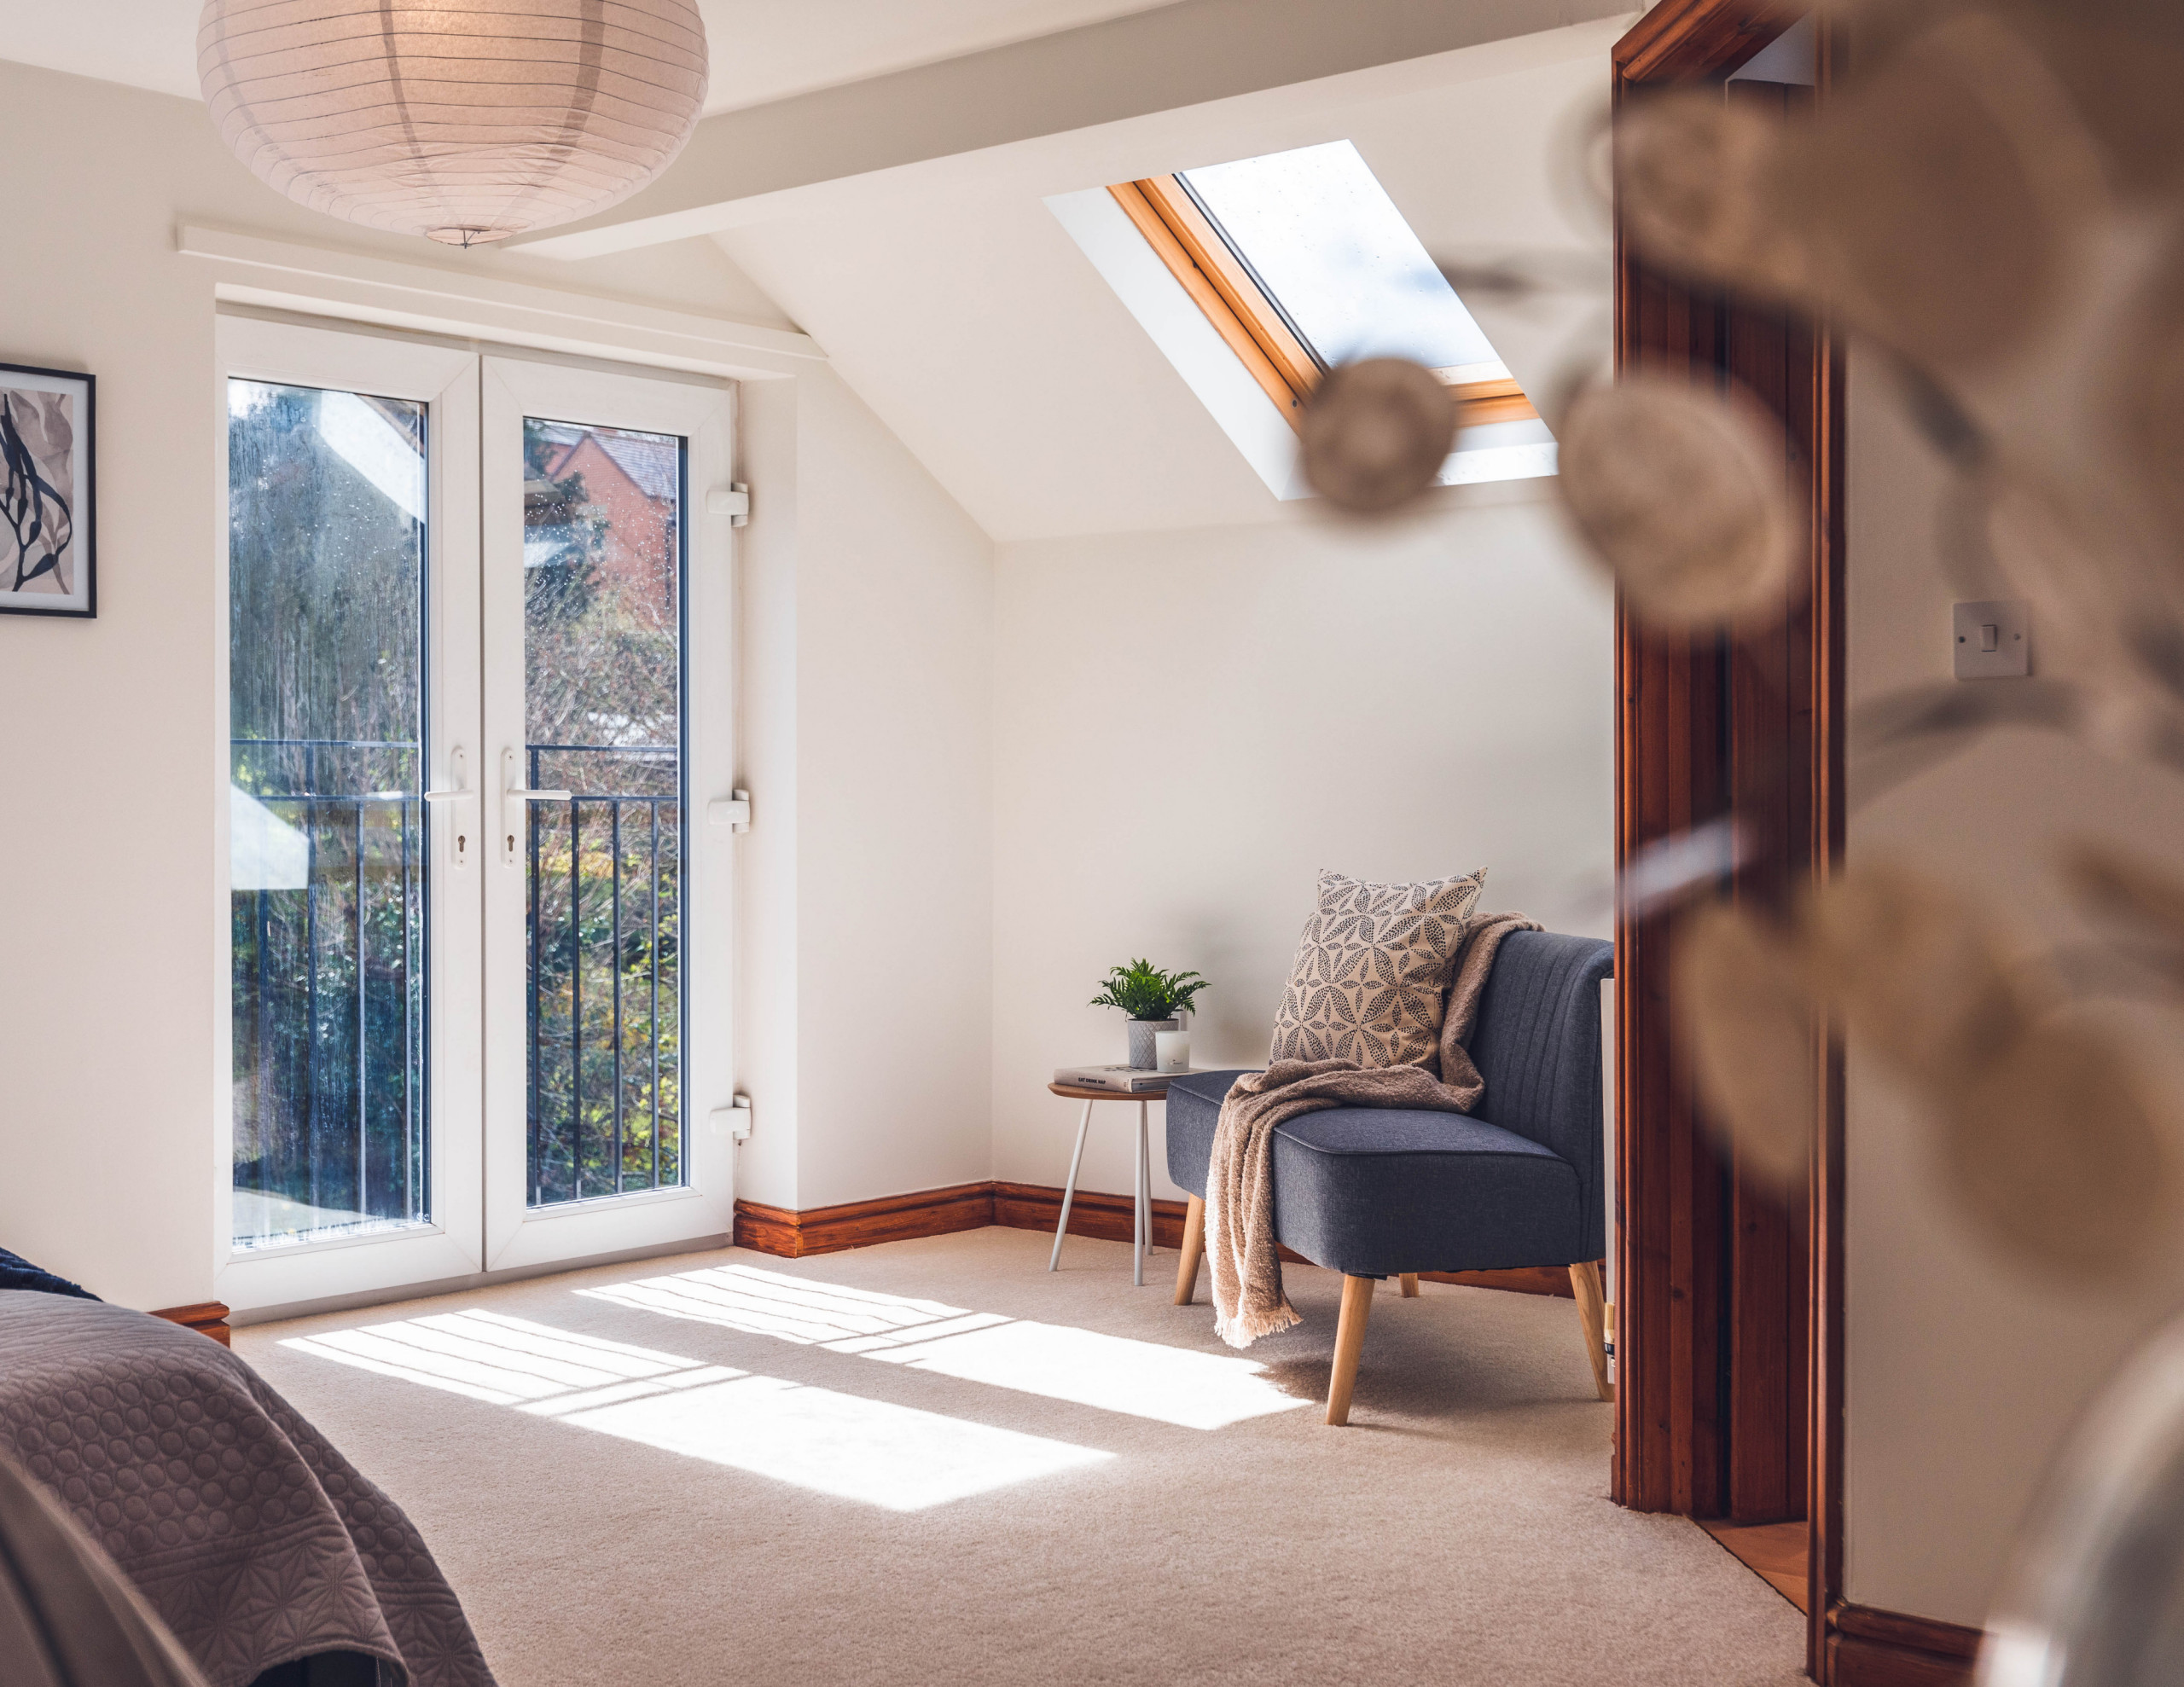 The large 4 bedroom in Derbyshire house was empty and some of the restricted height bedrooms seemed very small so they really saw the investment staging could bring when presenting the property for sa